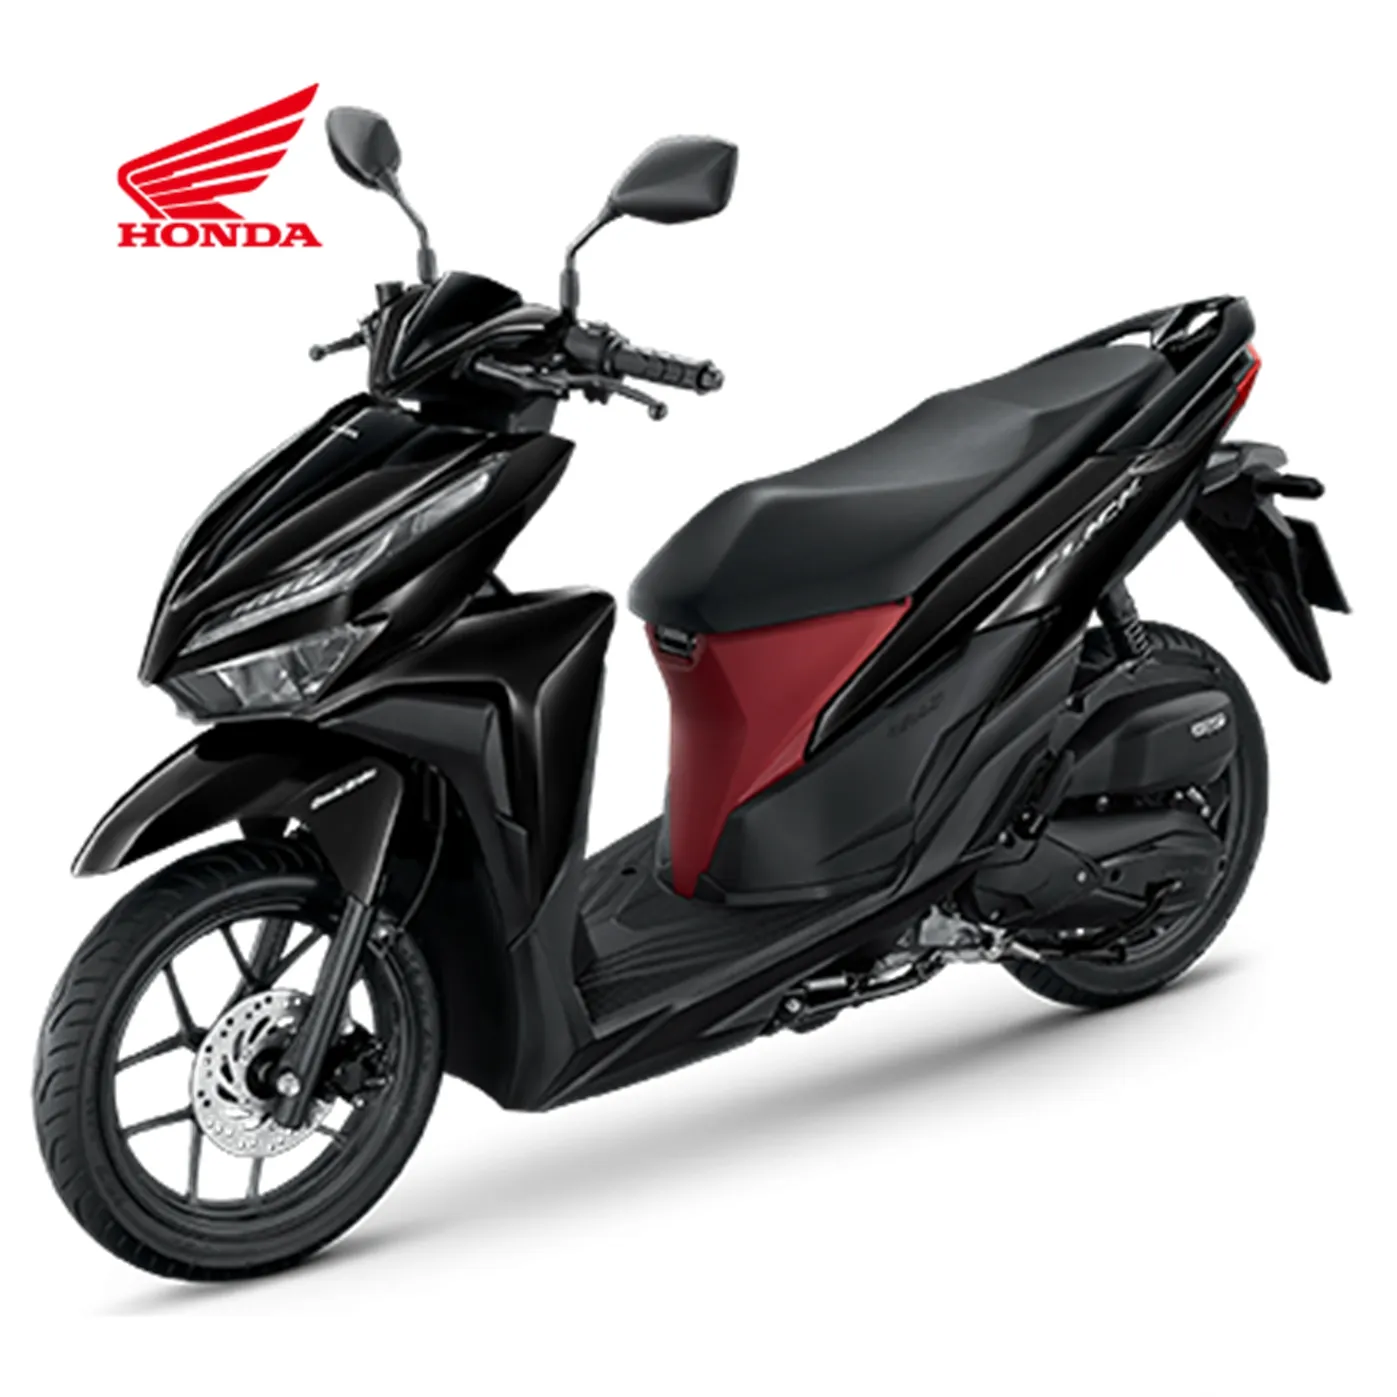 Brand New Thailand motorcycles Honda Click 125 Scooter